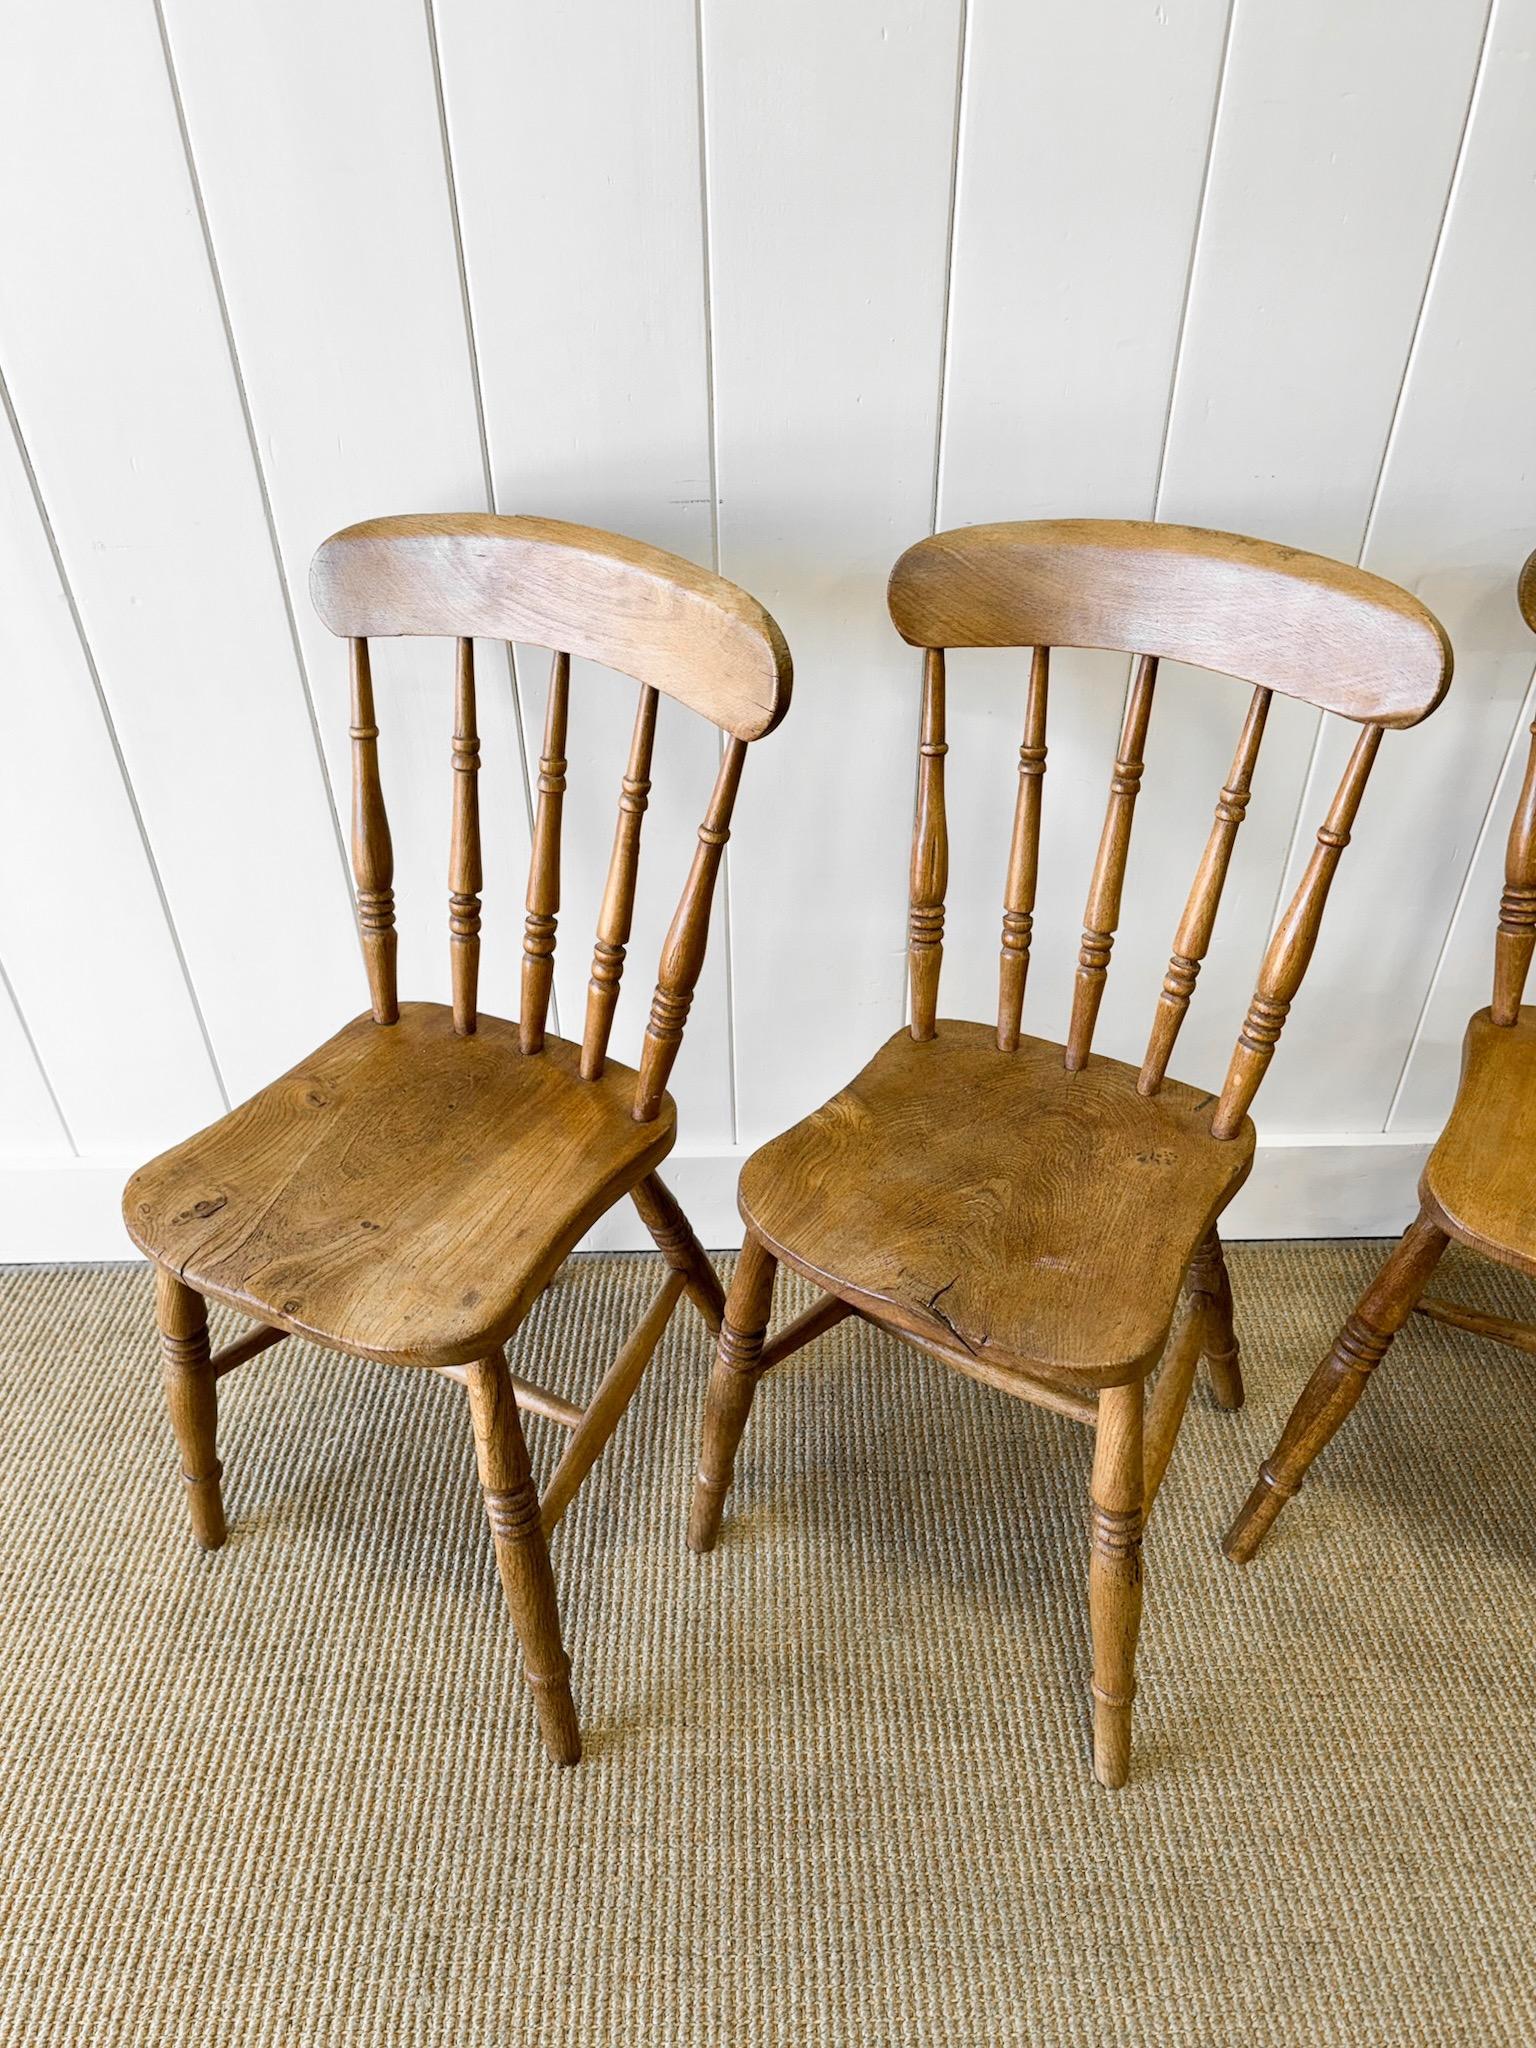 Country An Antique Set of 4 Spindle Back Chairs For Sale